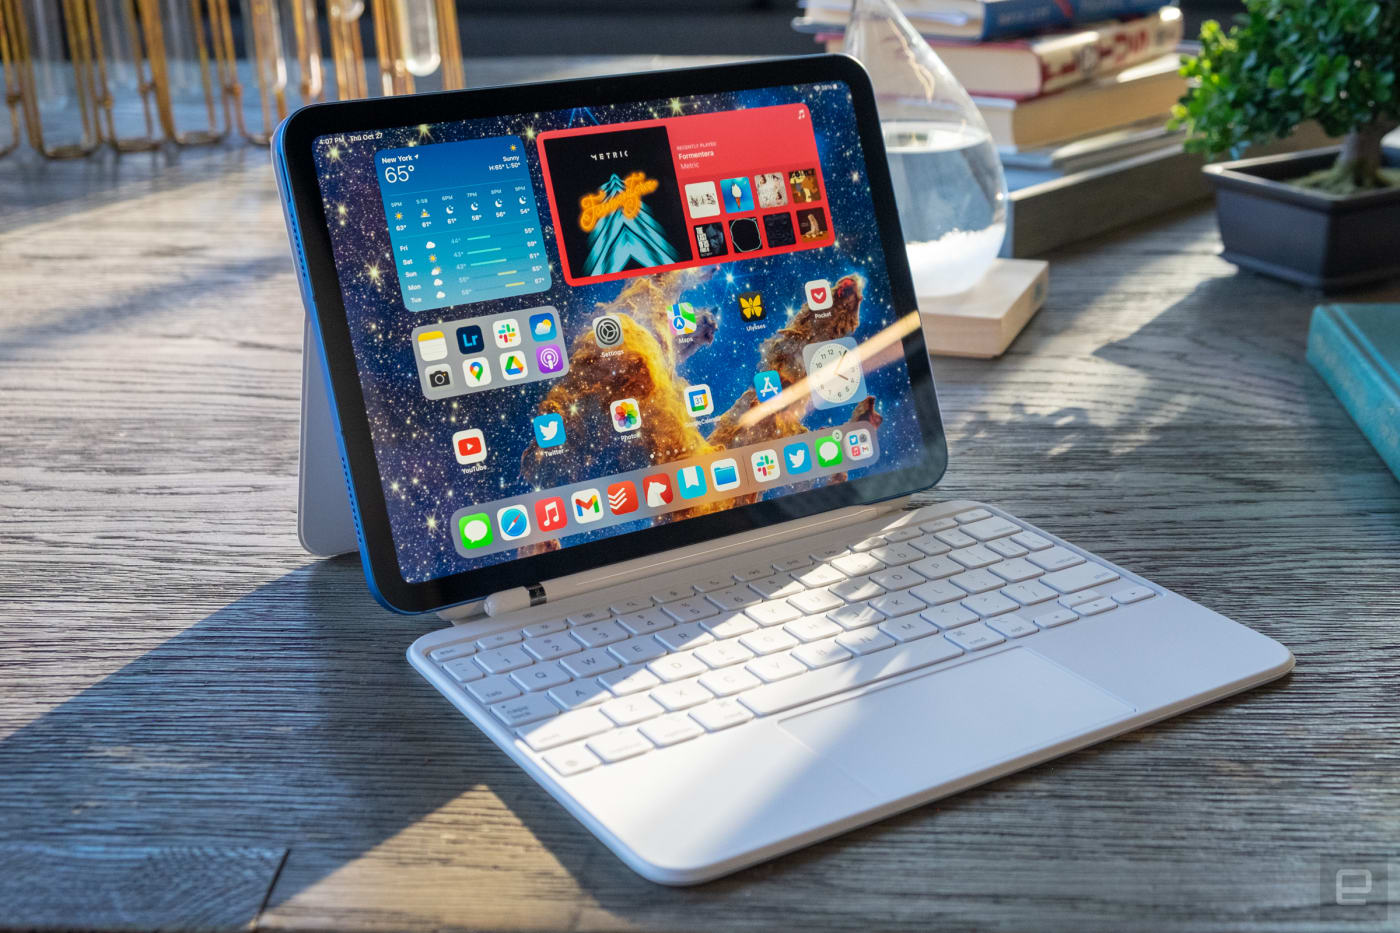 The 10th-gen iPad drops to its lowest price ever